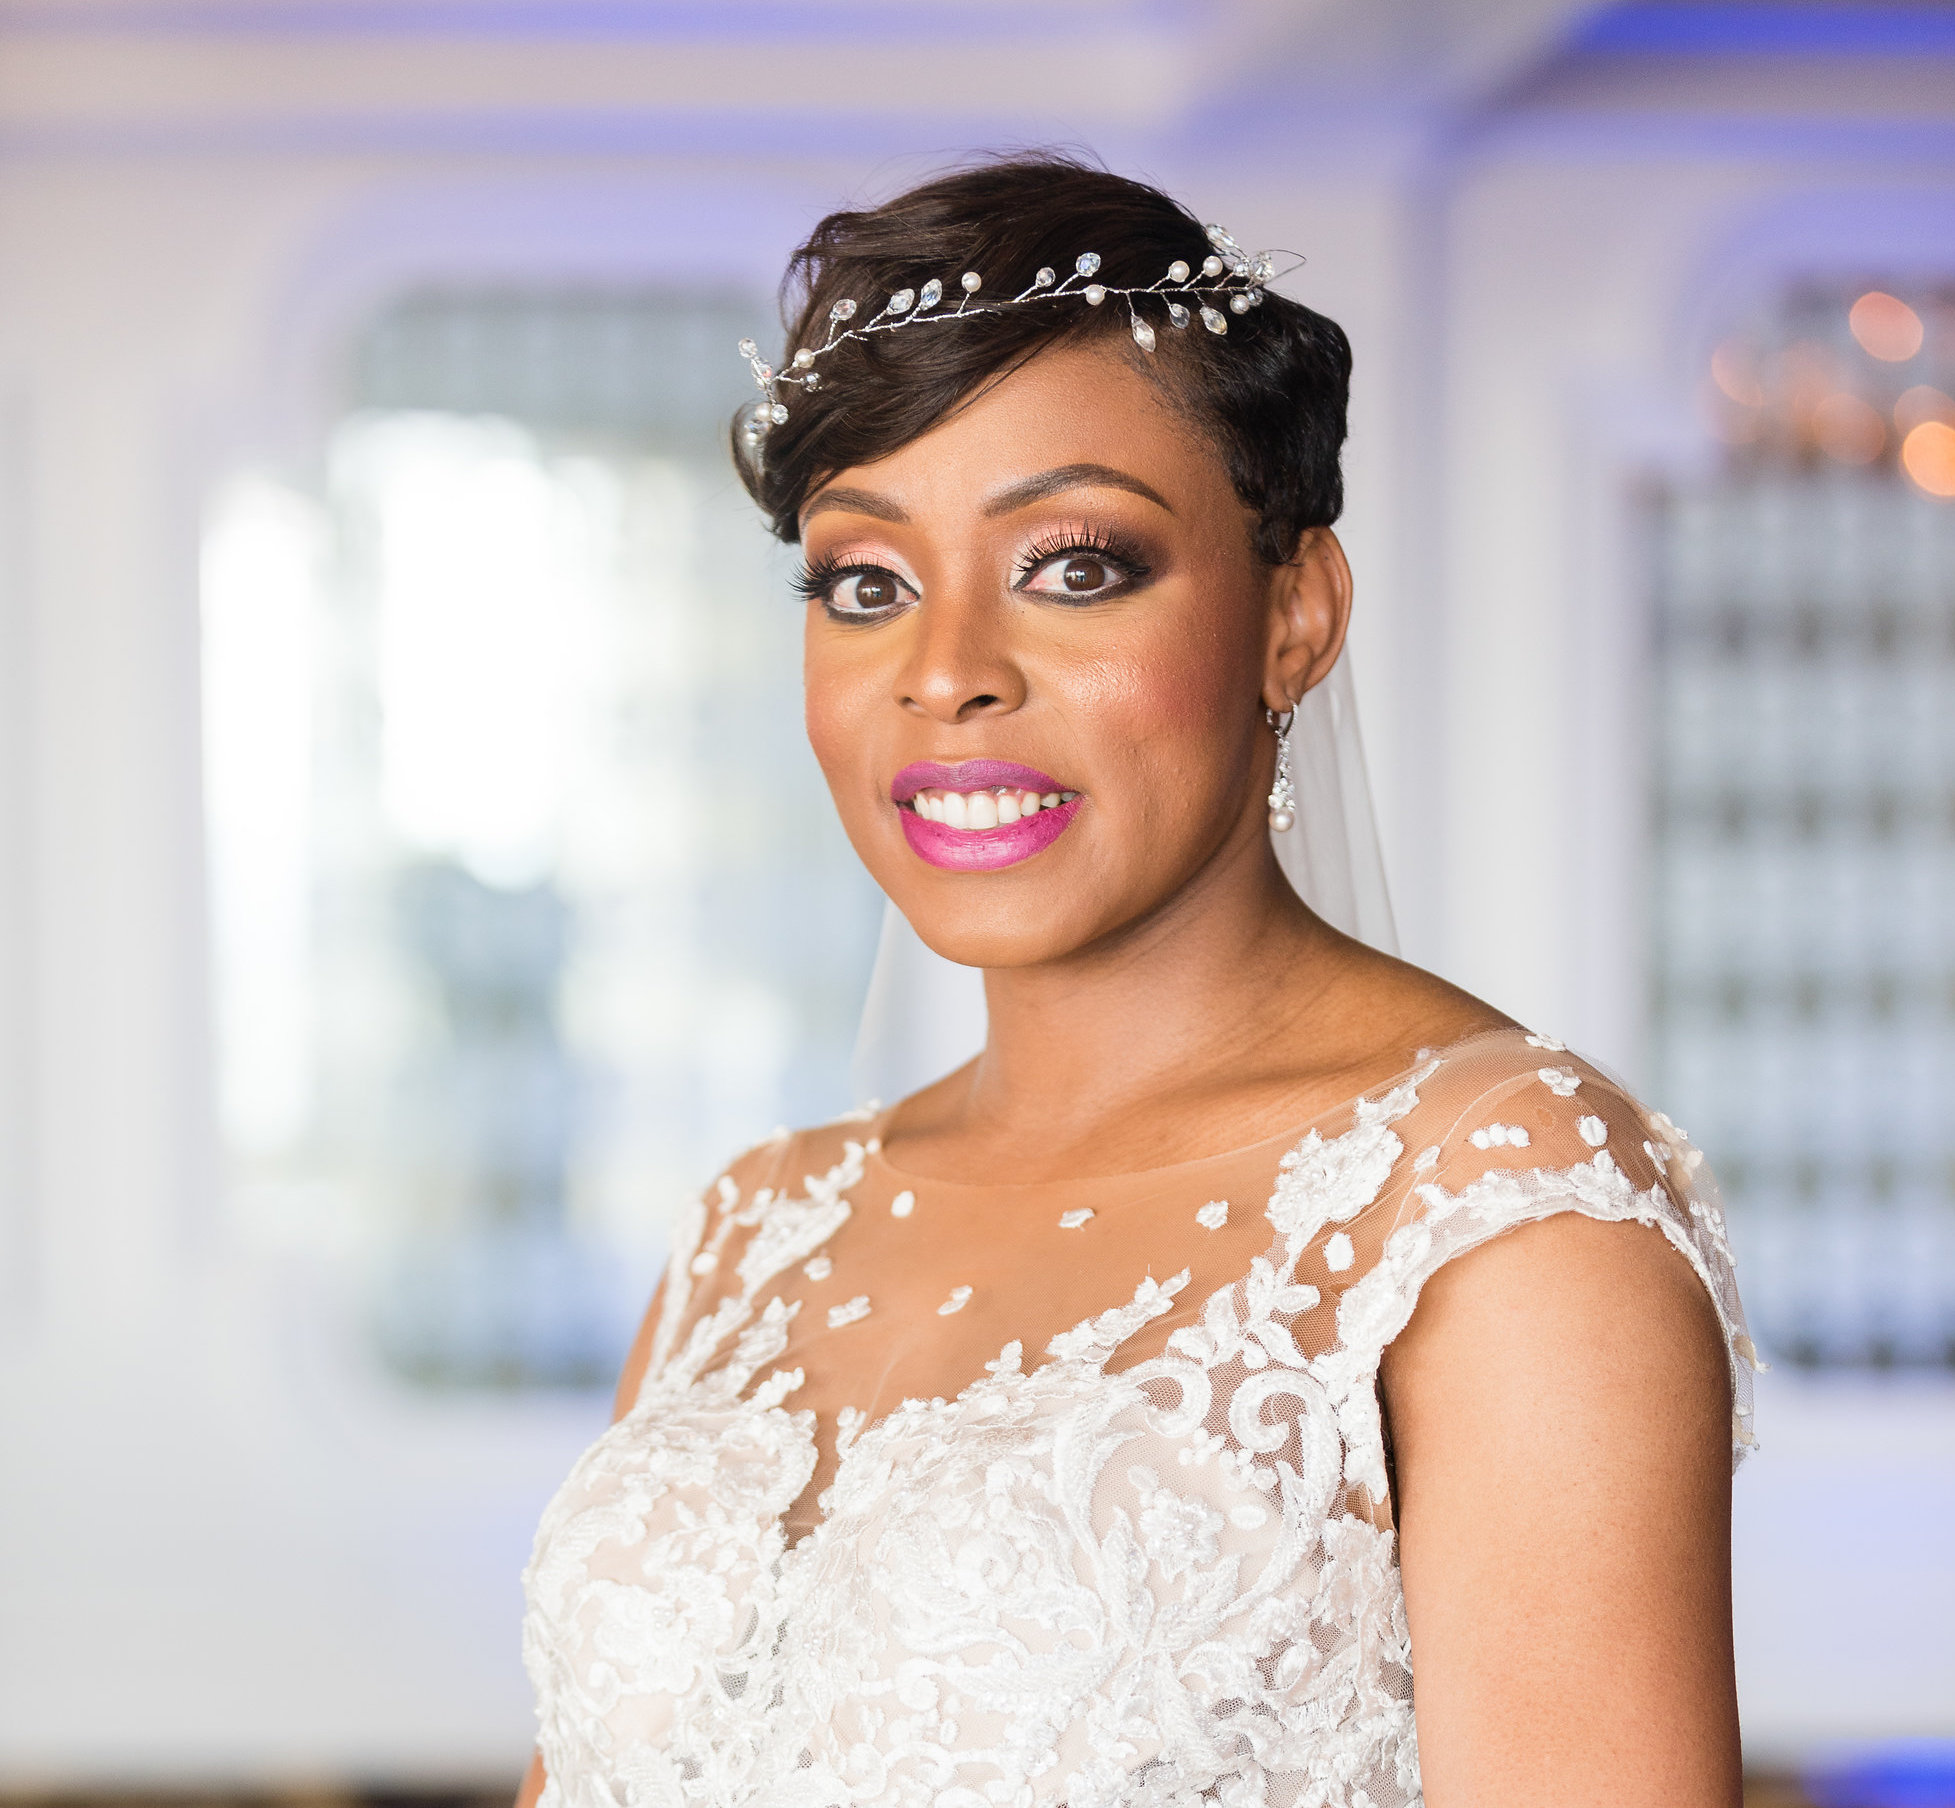 Wedding Hair And Makeup For Black Women How To Choose Your Beauty Team For Your Wedding Day Irie Chic